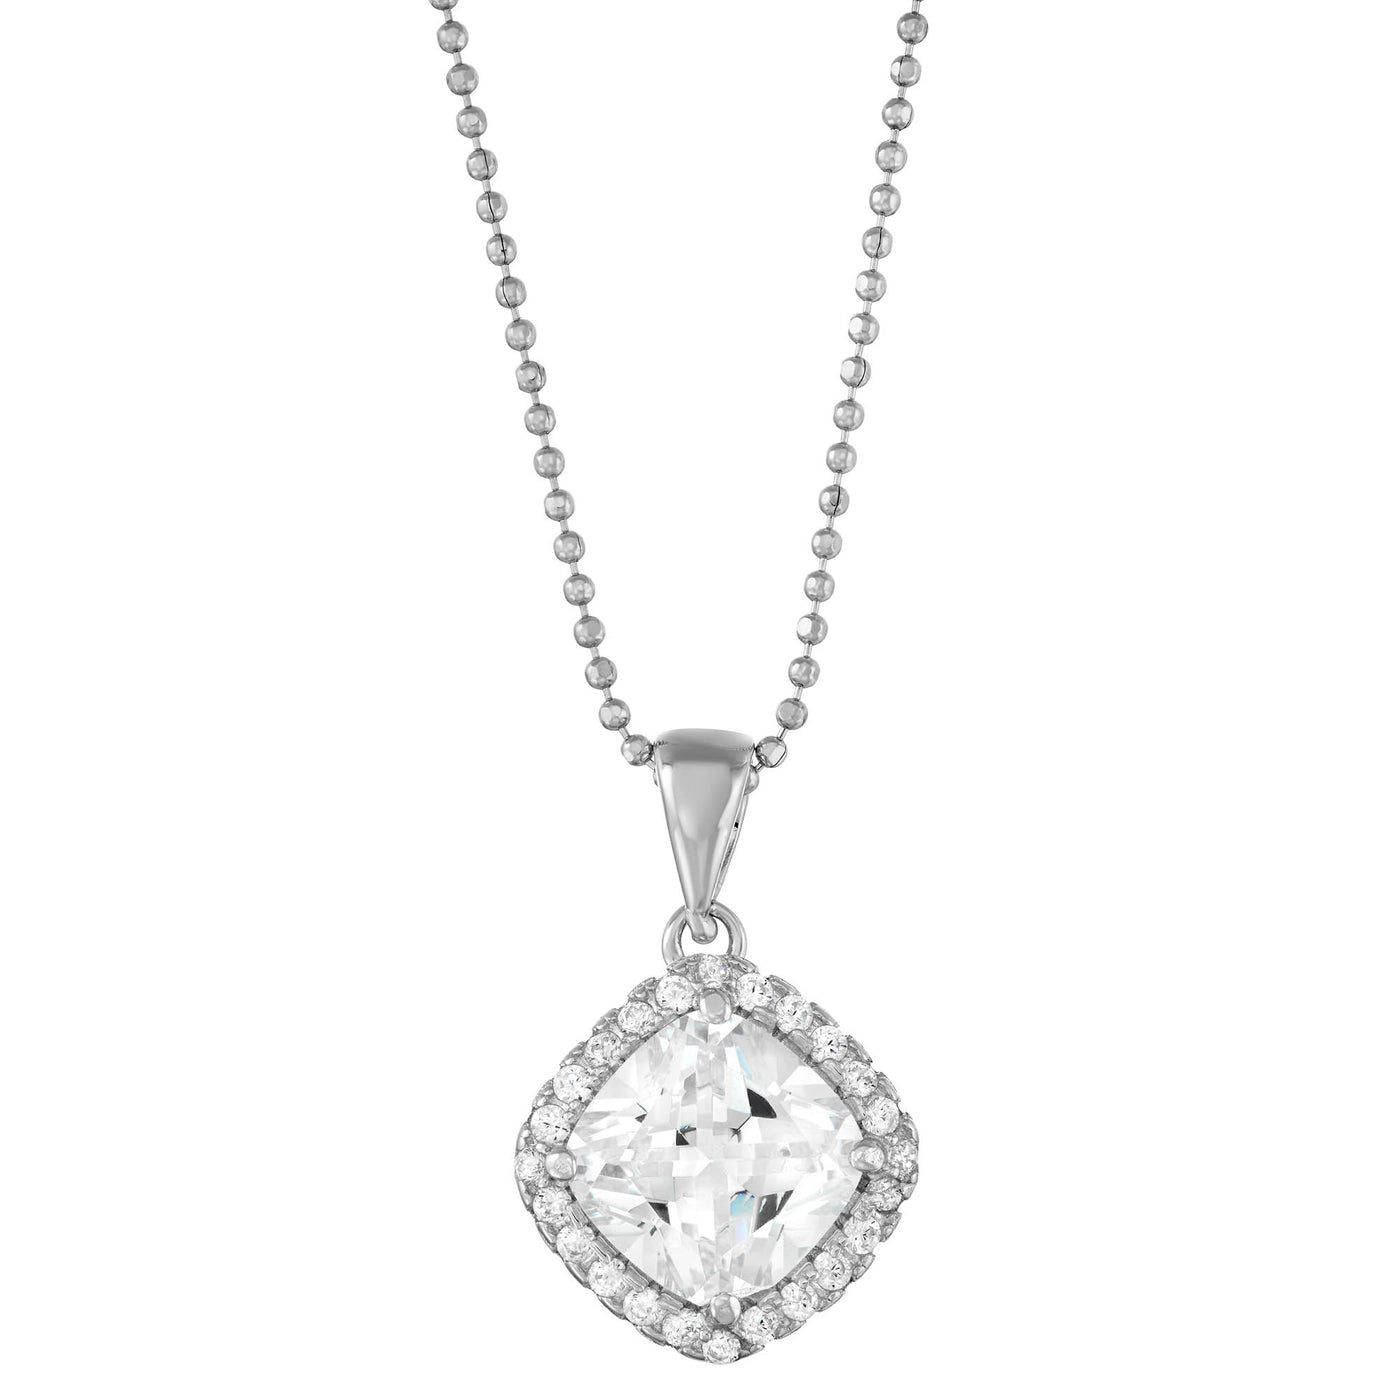 Rebecca Sloane Silver Cushion Pendant With Faceted White CZ